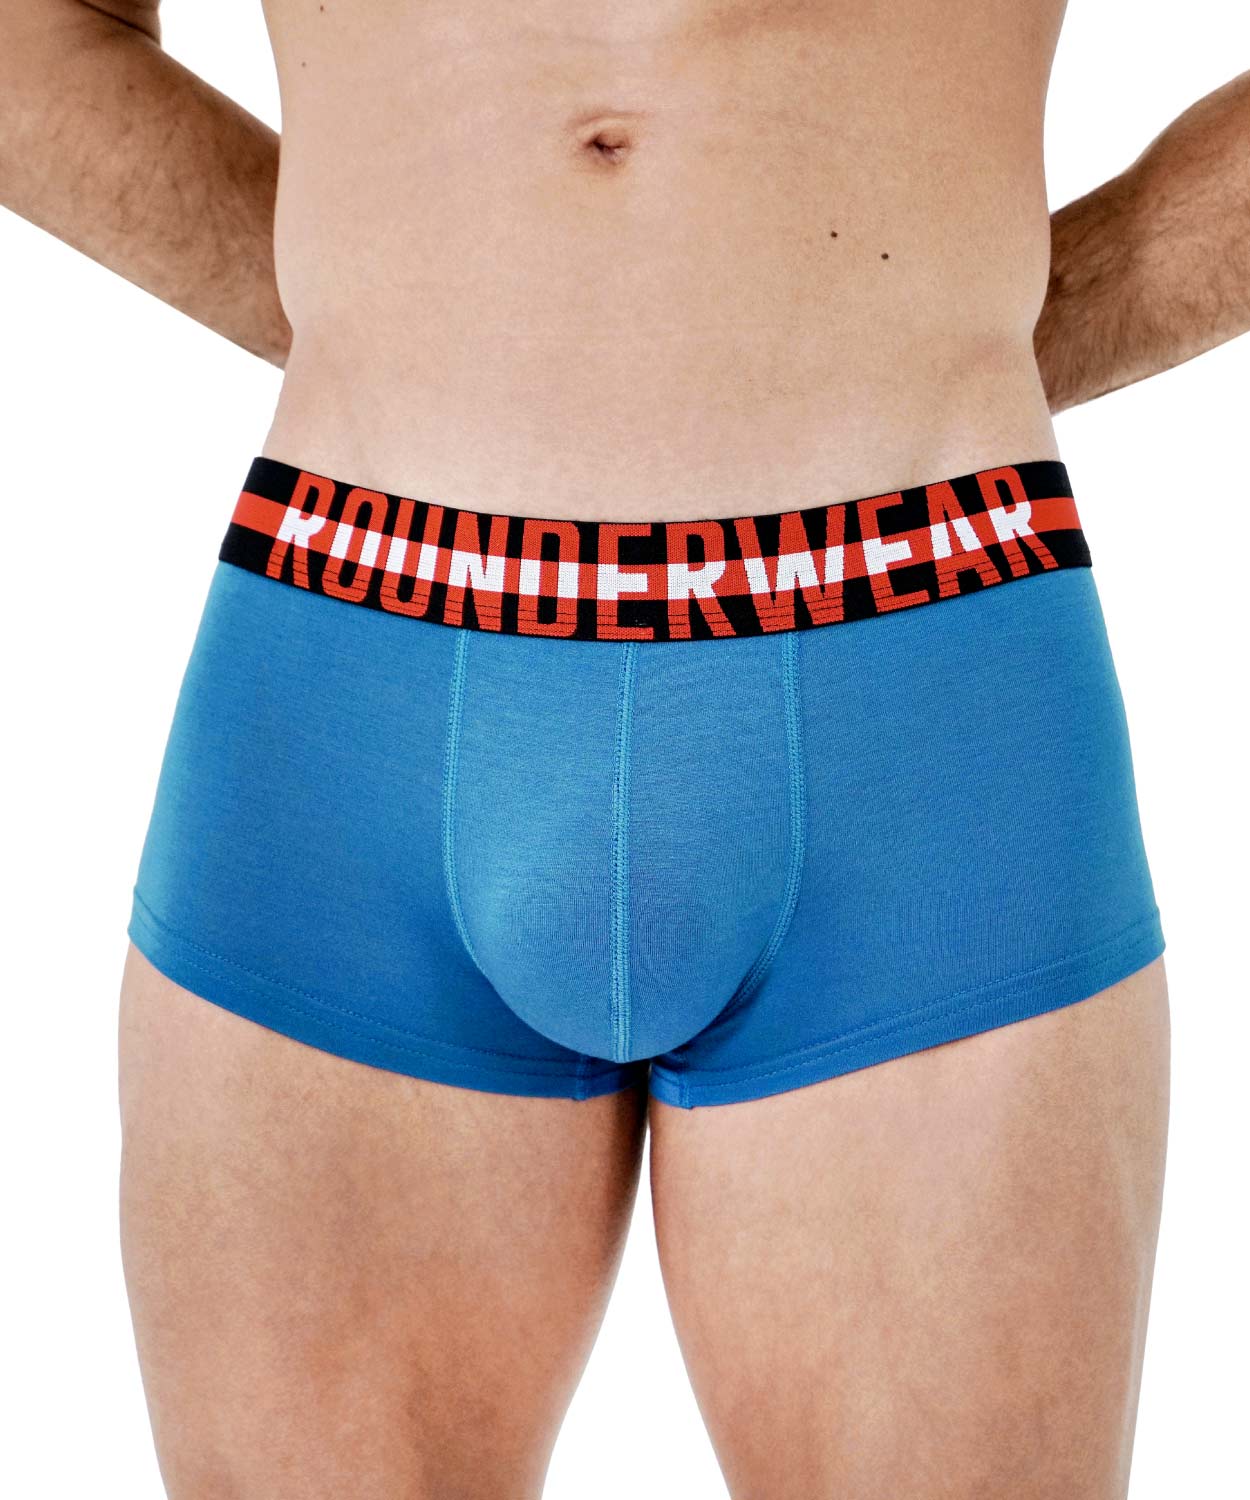 Hipster Trunk - Black & Red